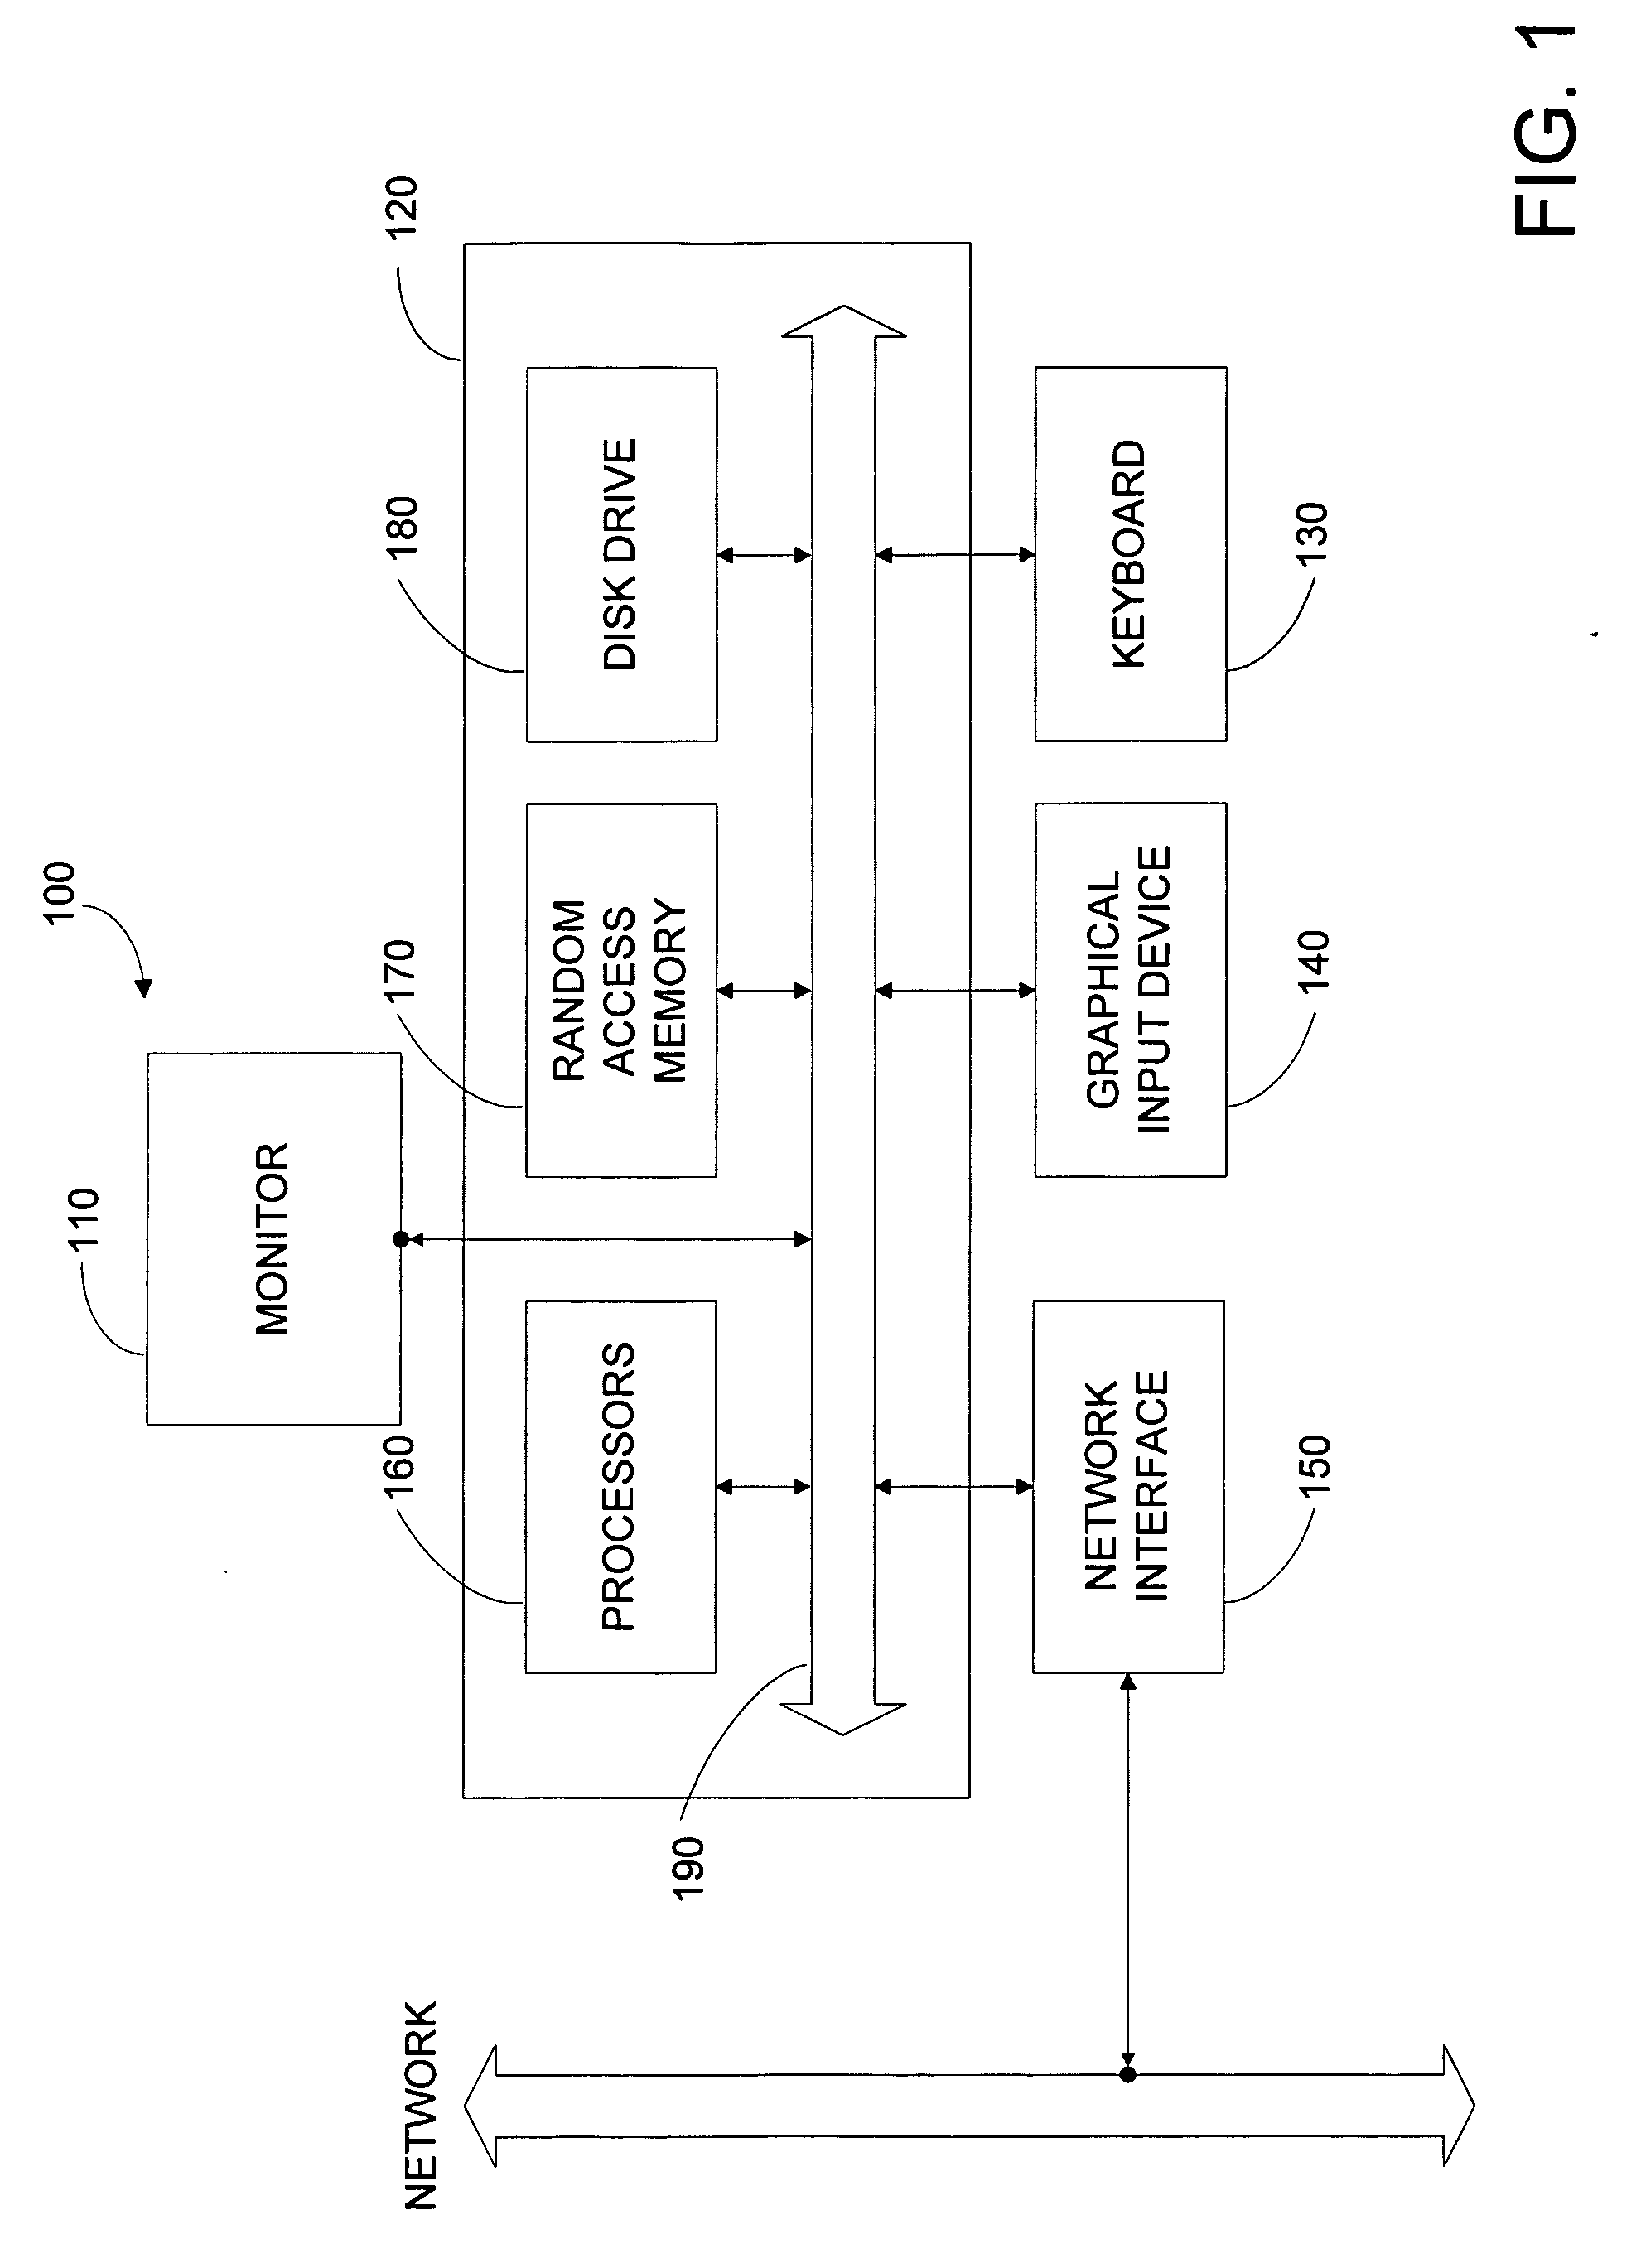 Automatic pre-render pinning of change isolated assets methods and apparatus